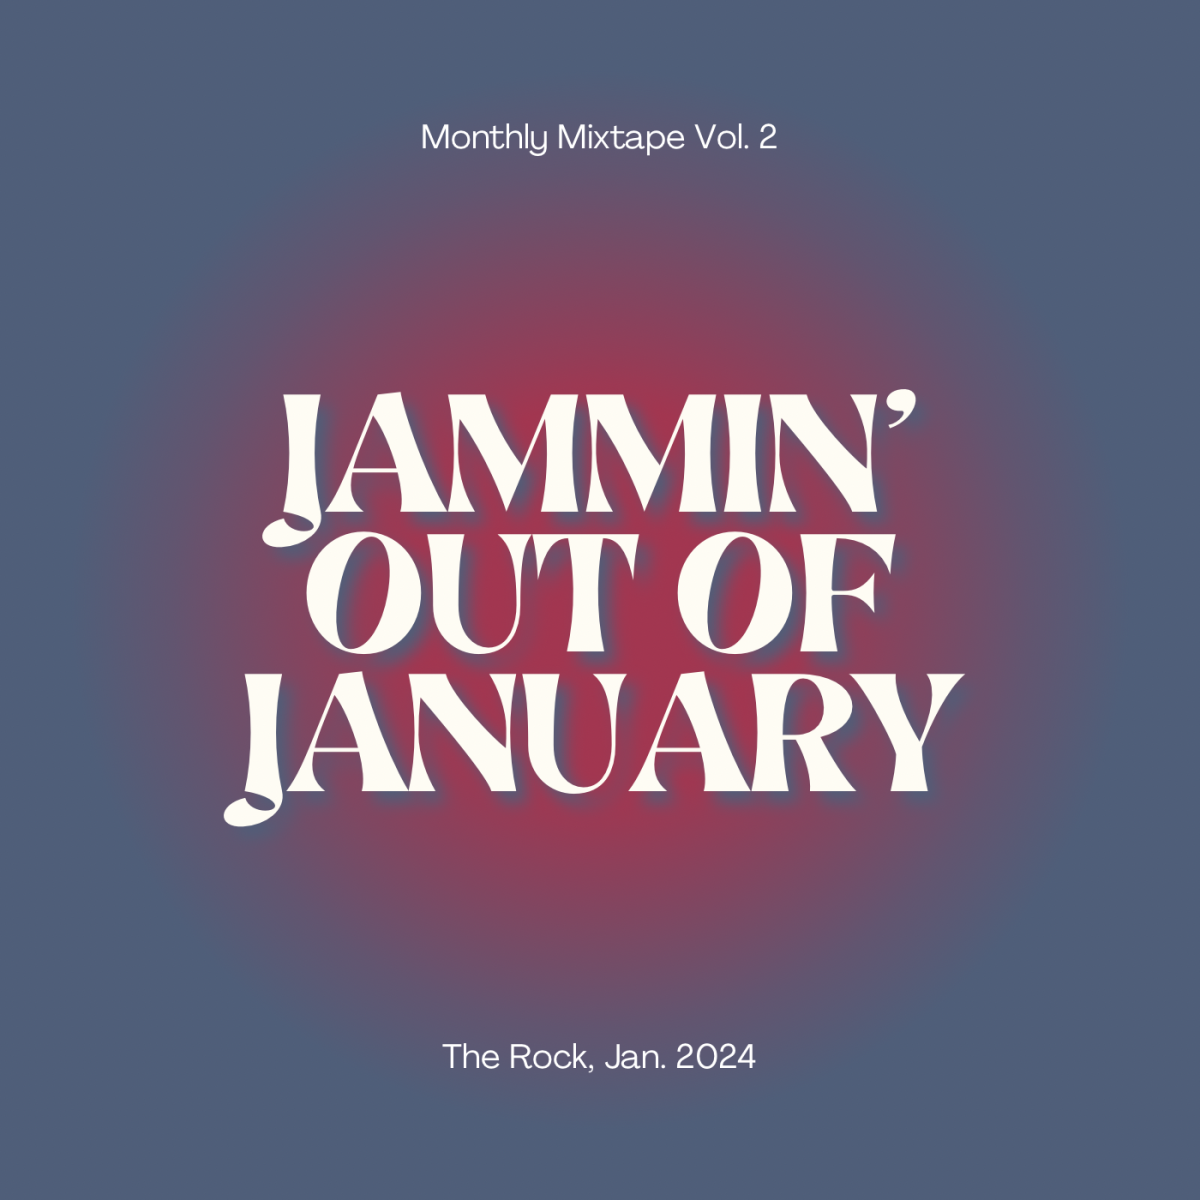 The graphic reads Jammin’ Out of January to introduce the assortment of songs picked this month.